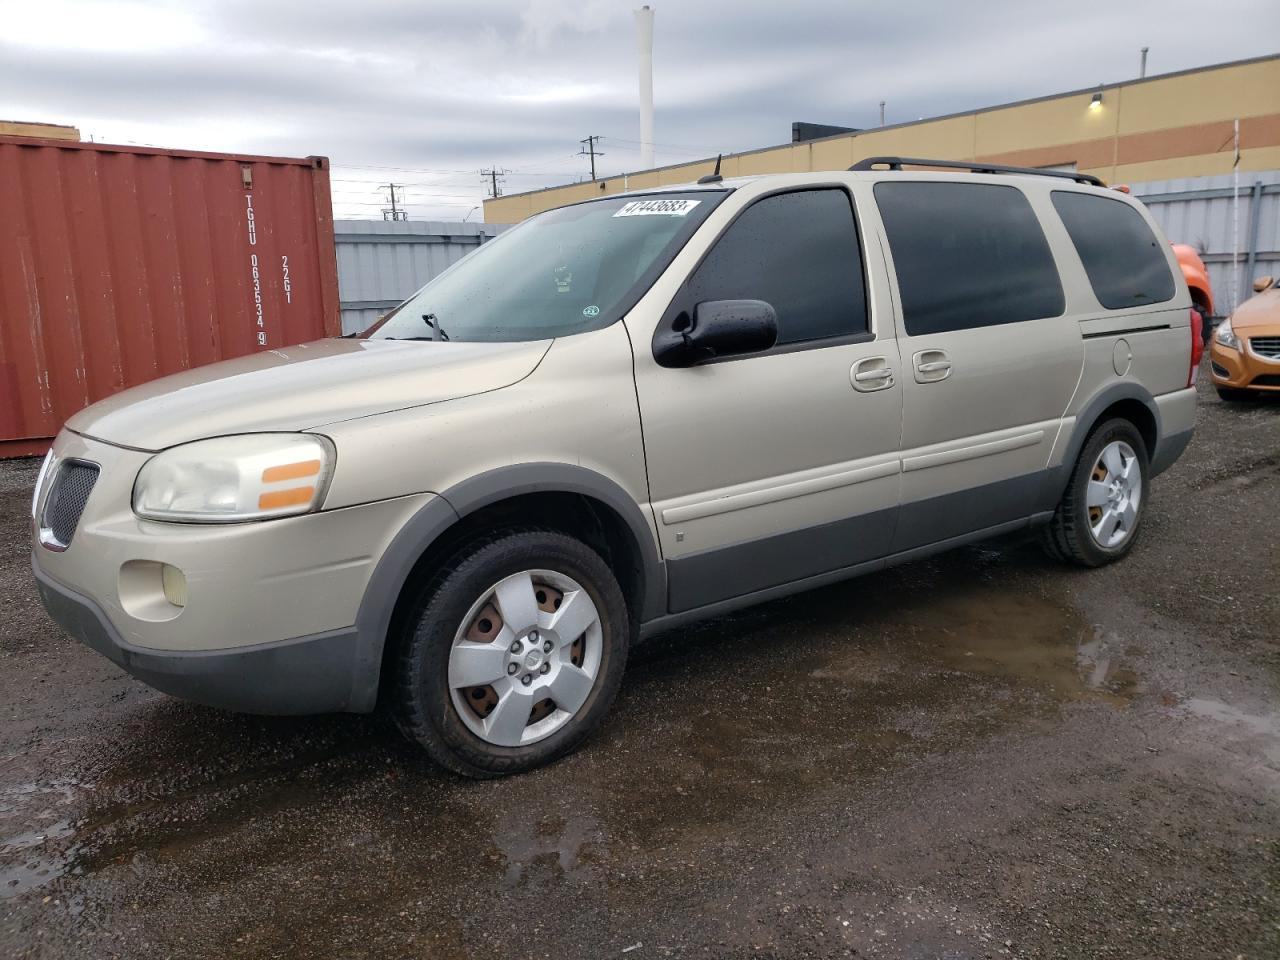 2009 Pontiac Montana SV6 for sale at Copart Bowmanville, ON Lot #47443*** |  SalvageReseller.com